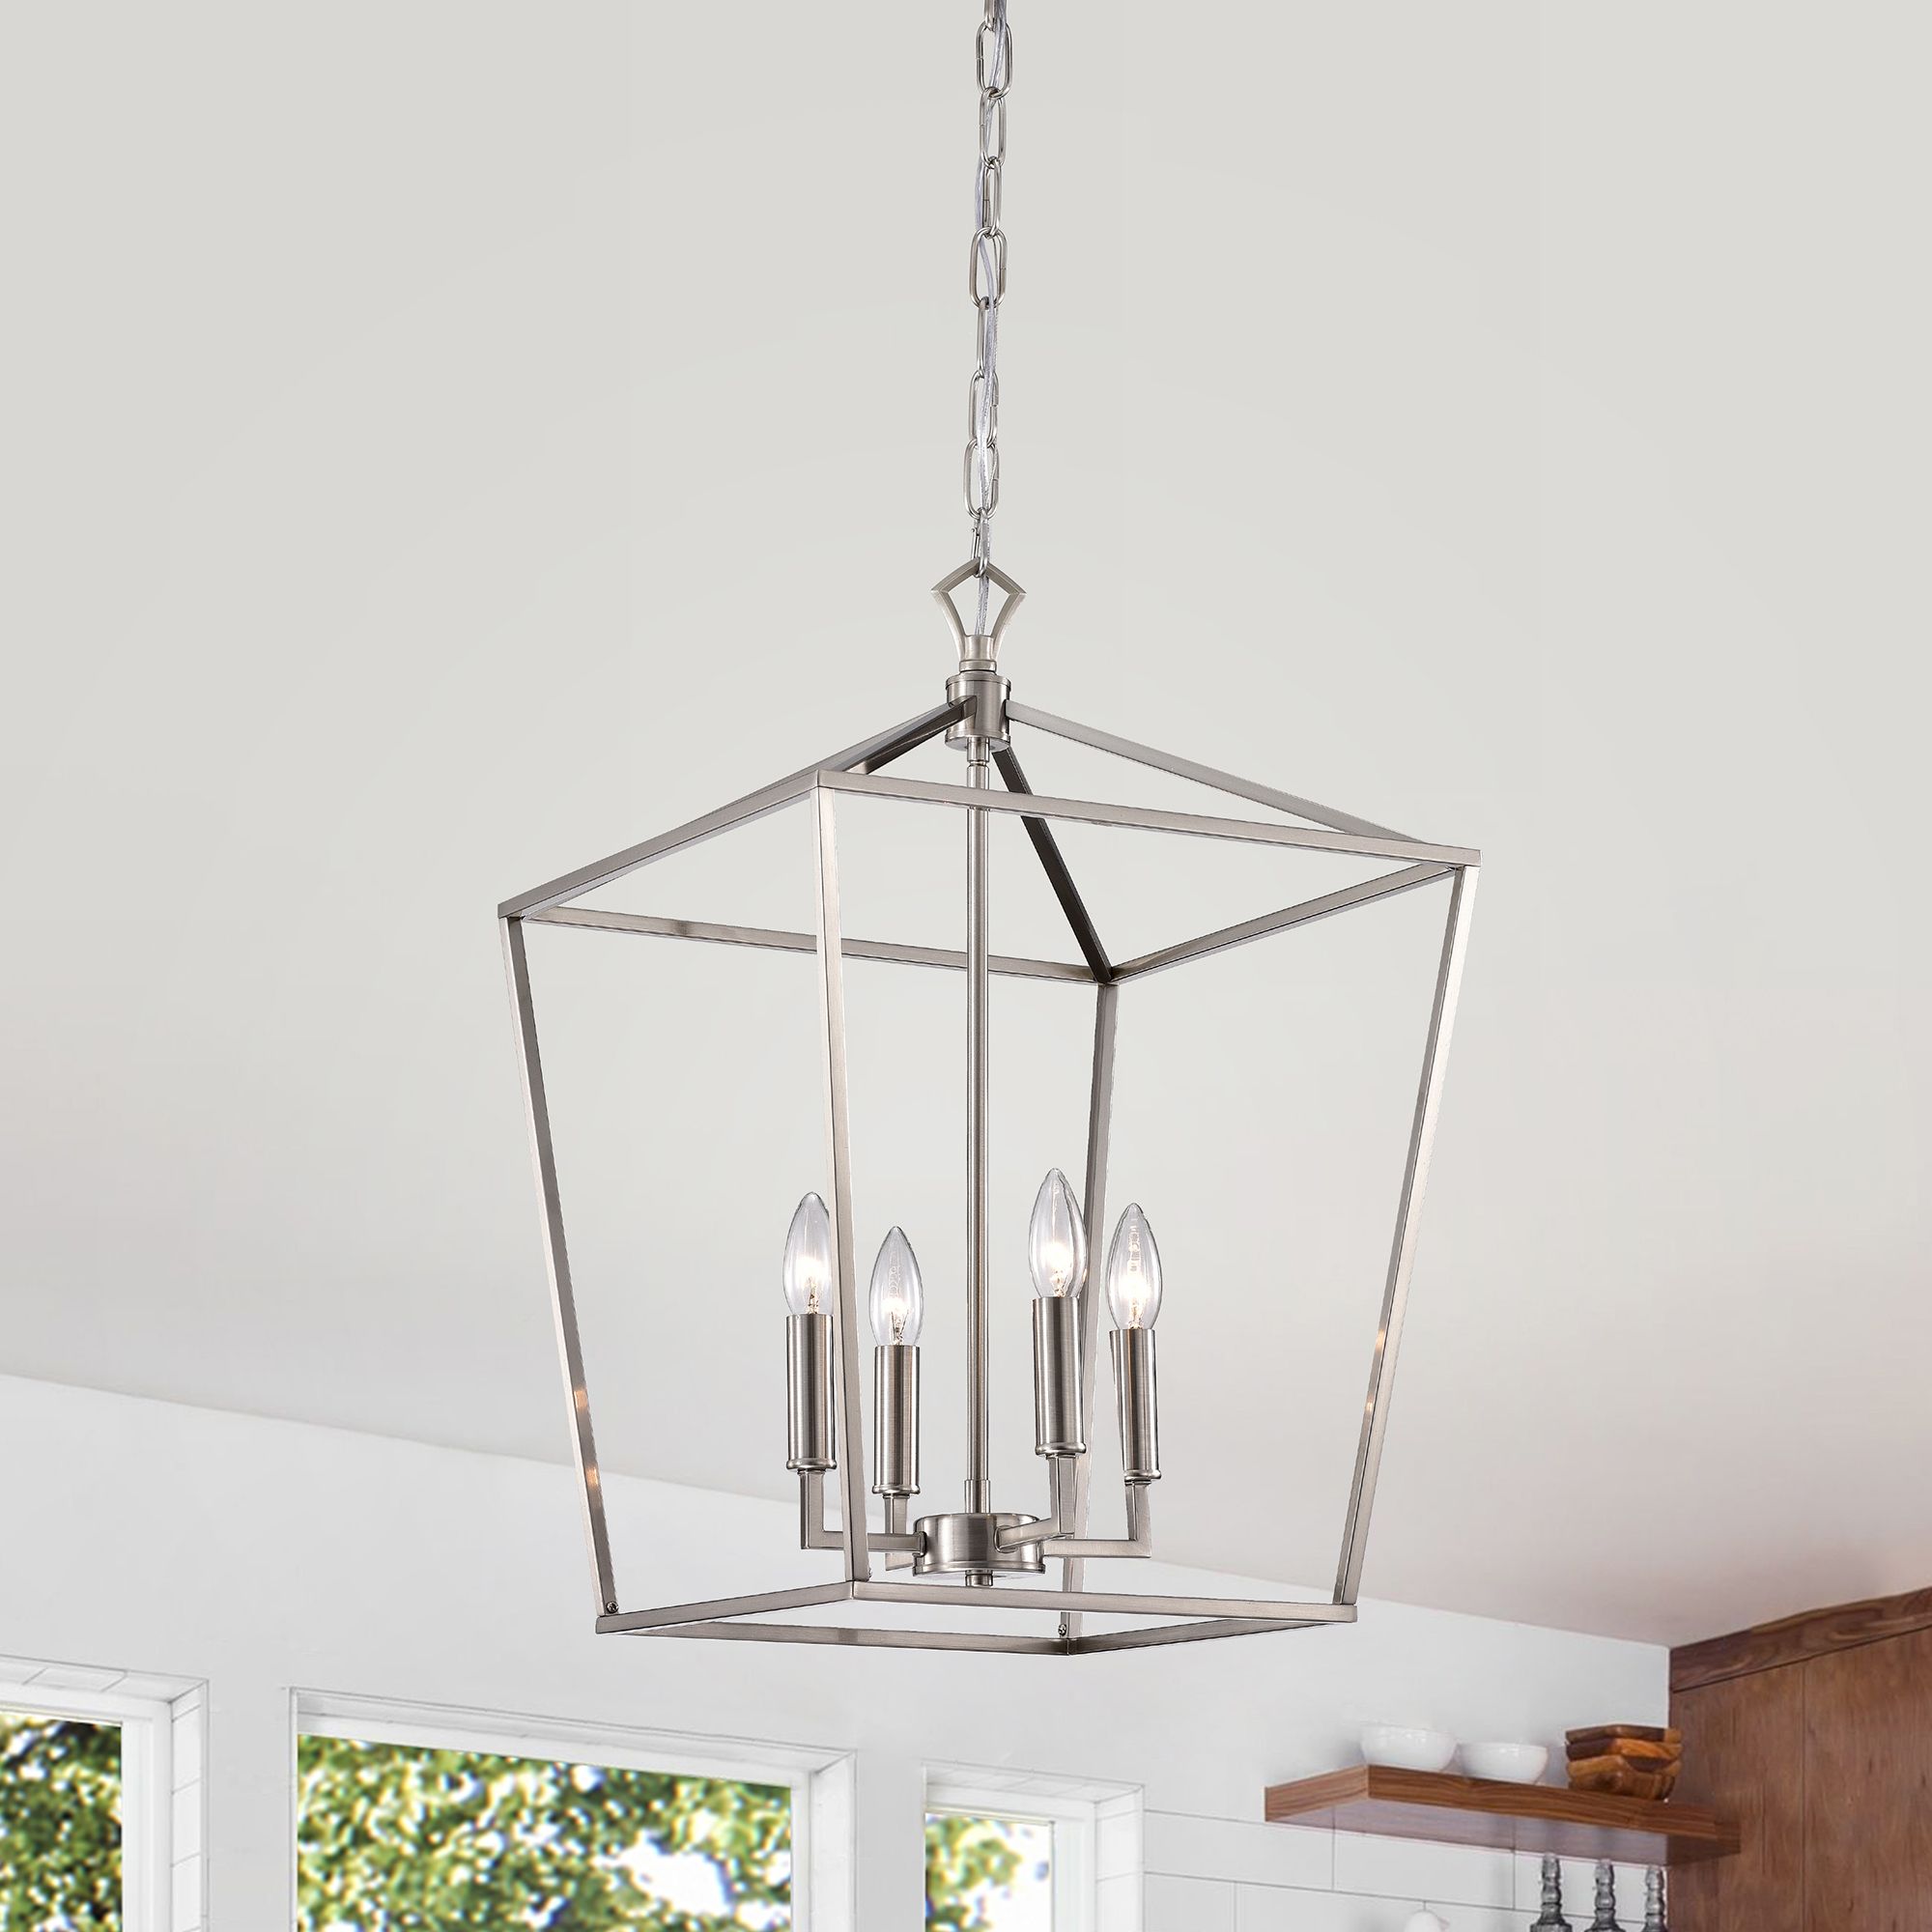 4 Light Brushed Nickel Lantern Pendant Chandelier 16 In – Edvivi Lighting With Regard To Widely Used Satin Nickel Lantern Chandeliers (View 12 of 13)